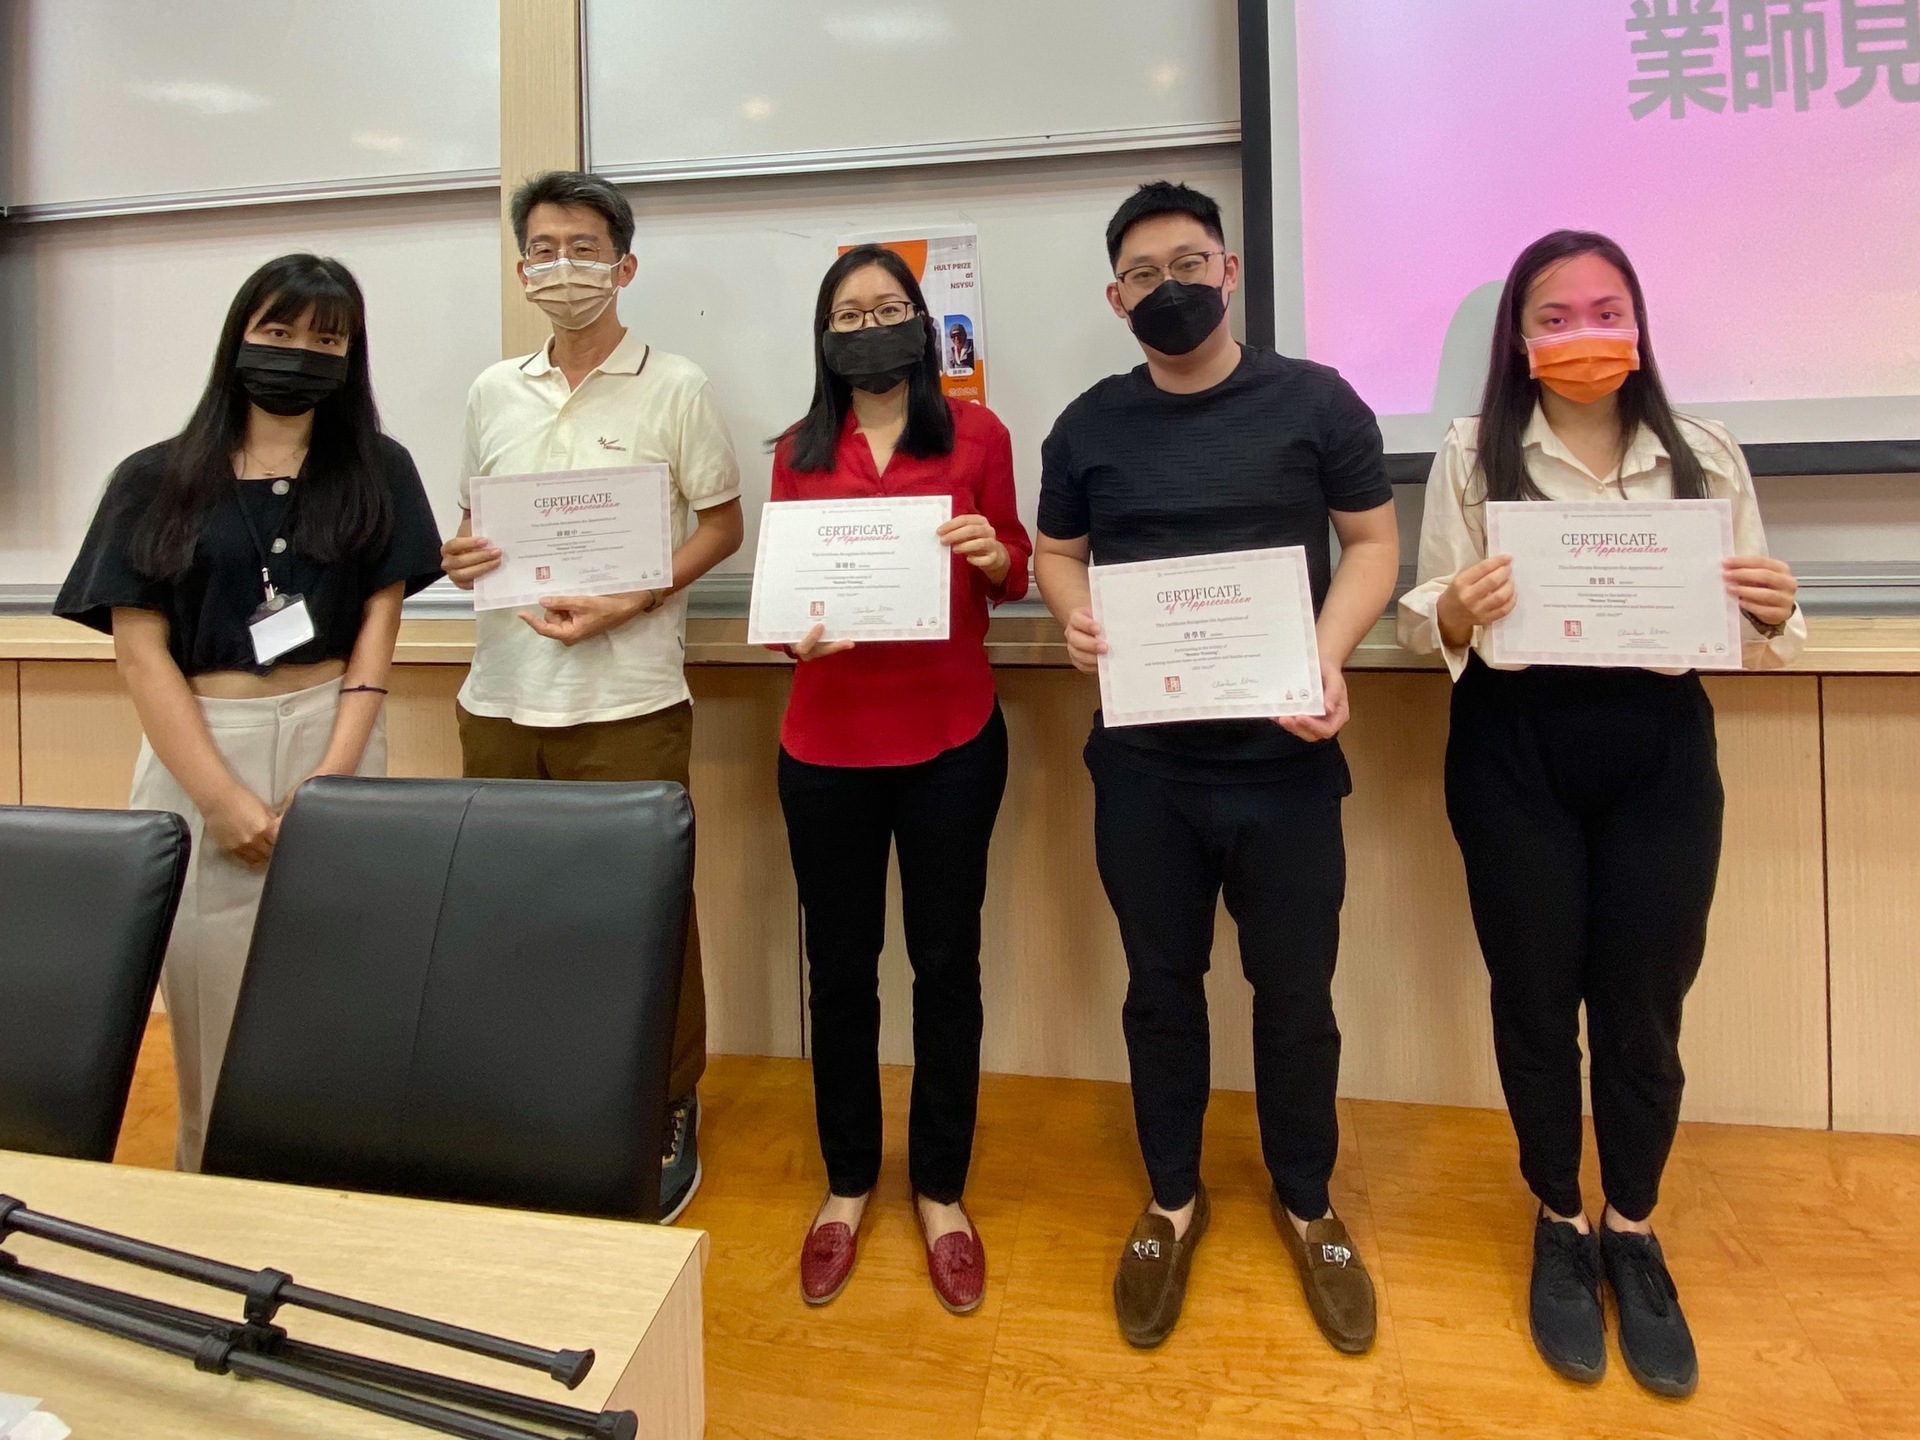 The campus director presented the certificates of appreciation to the mentors (From left to right are campus director I-Ting Wu, mentor Ken Shei, mentor Candice Yeh, mentor Justin Tang, and mentor Lyra Chan)